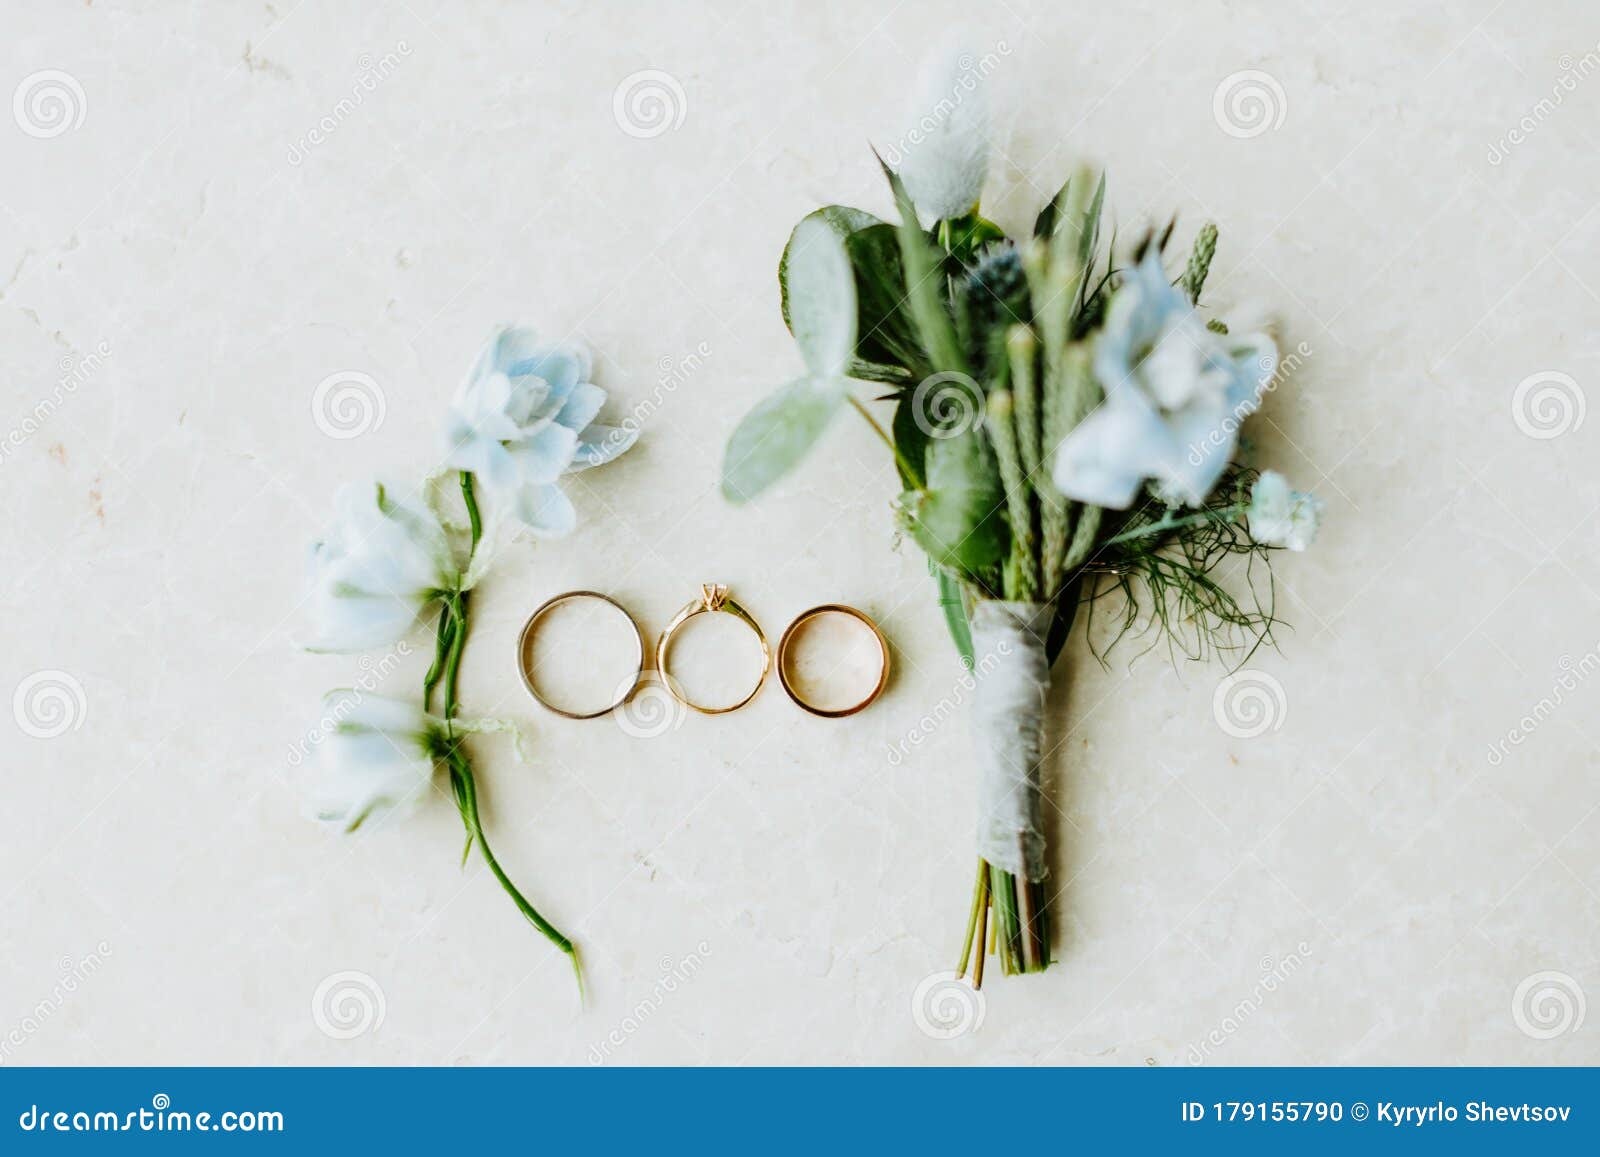 wedding ring and flowers lay flat